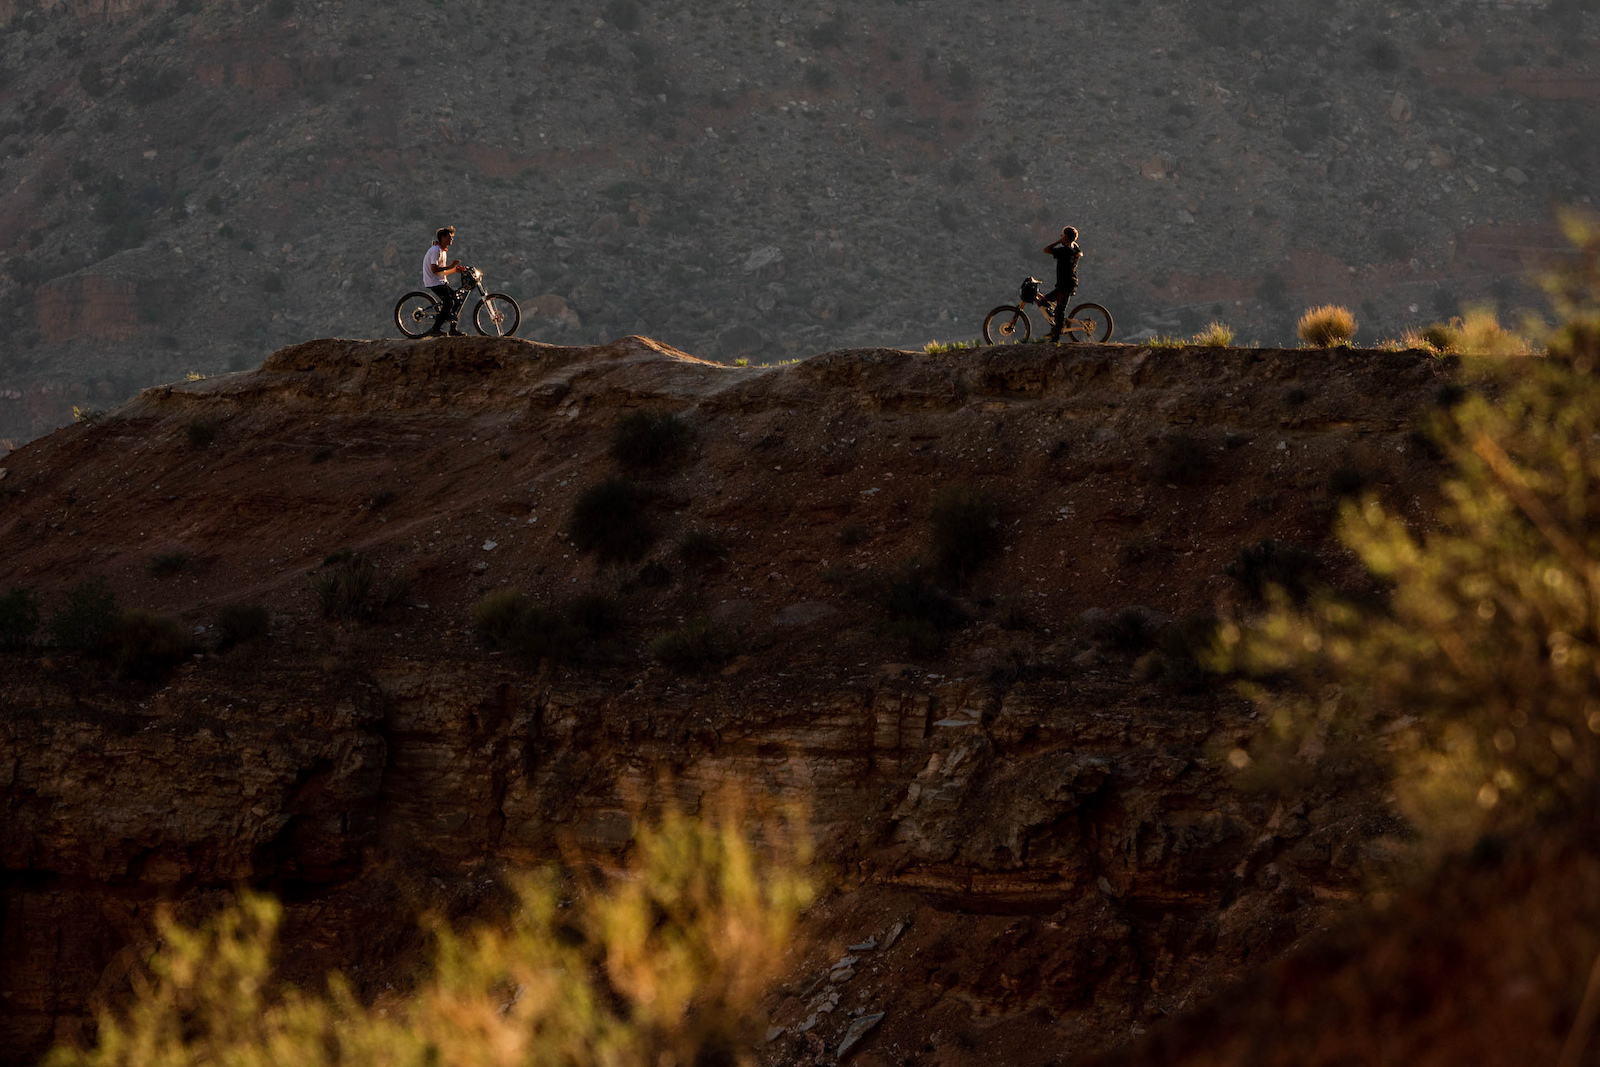 Reed Boggs in Virgin Utah during the filming of Riding Off Cliffs Josh Conroy